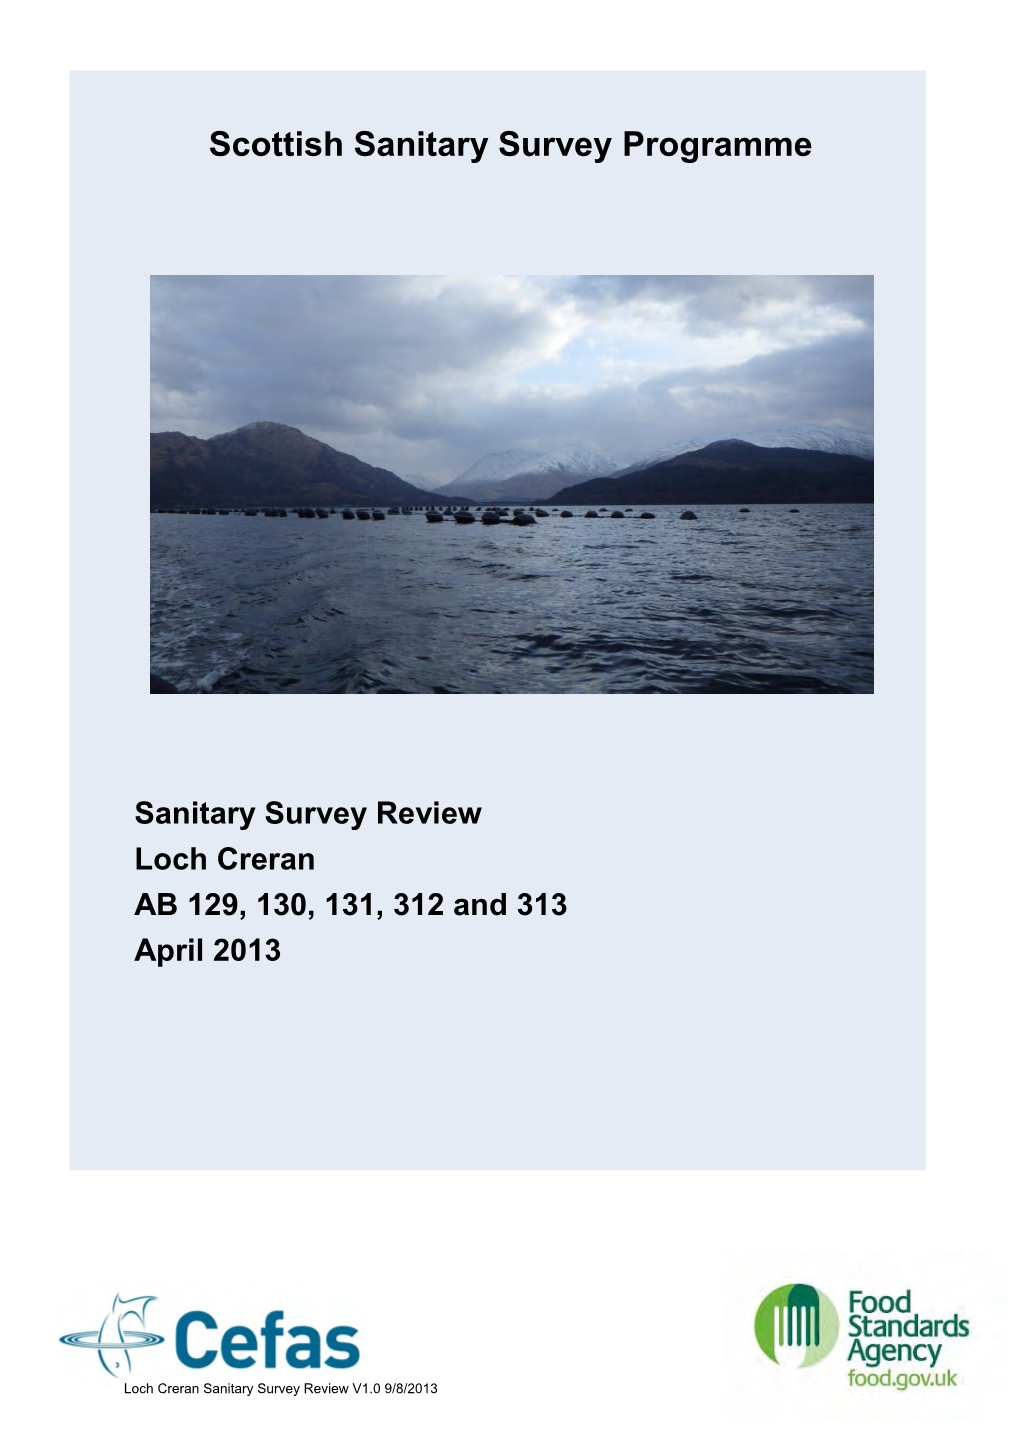 Sanitary Survey Review Loch Creran AB 129, 130, 131, 312 and 313 April 2013